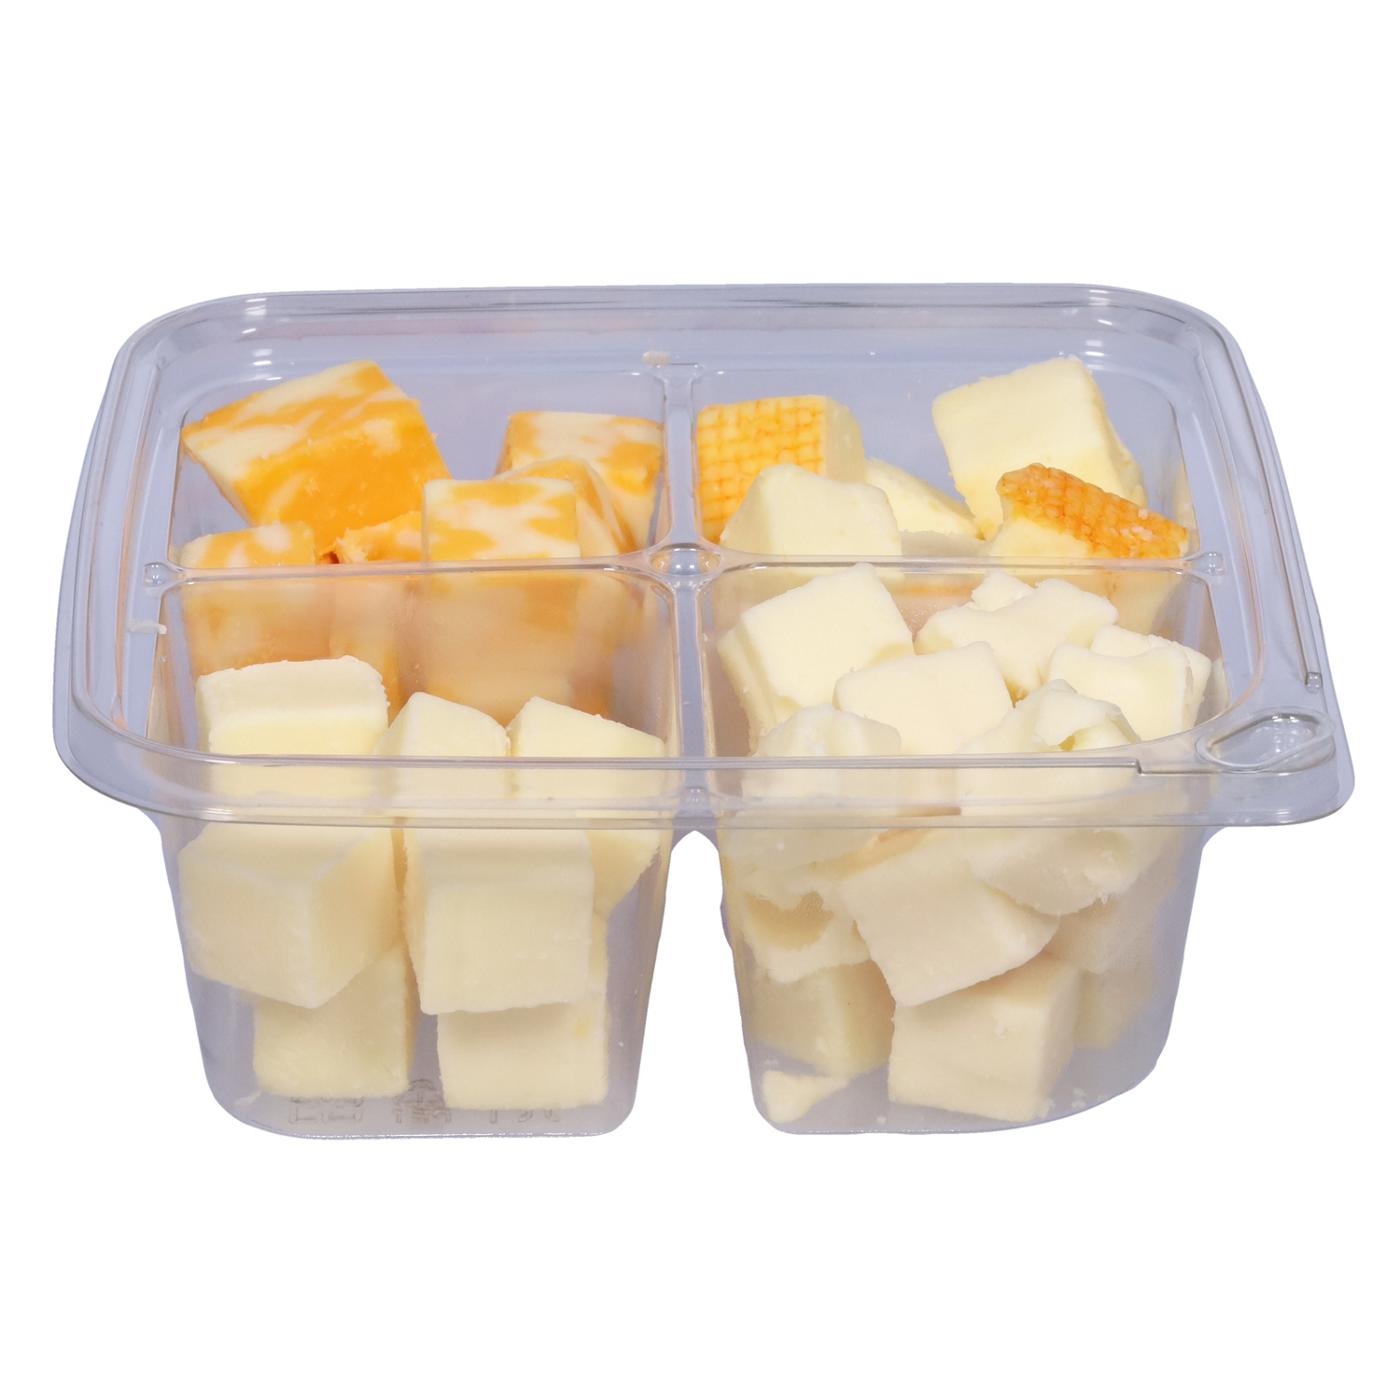 H-E-B Deli 4-Variety Cheese Cubes; image 2 of 2